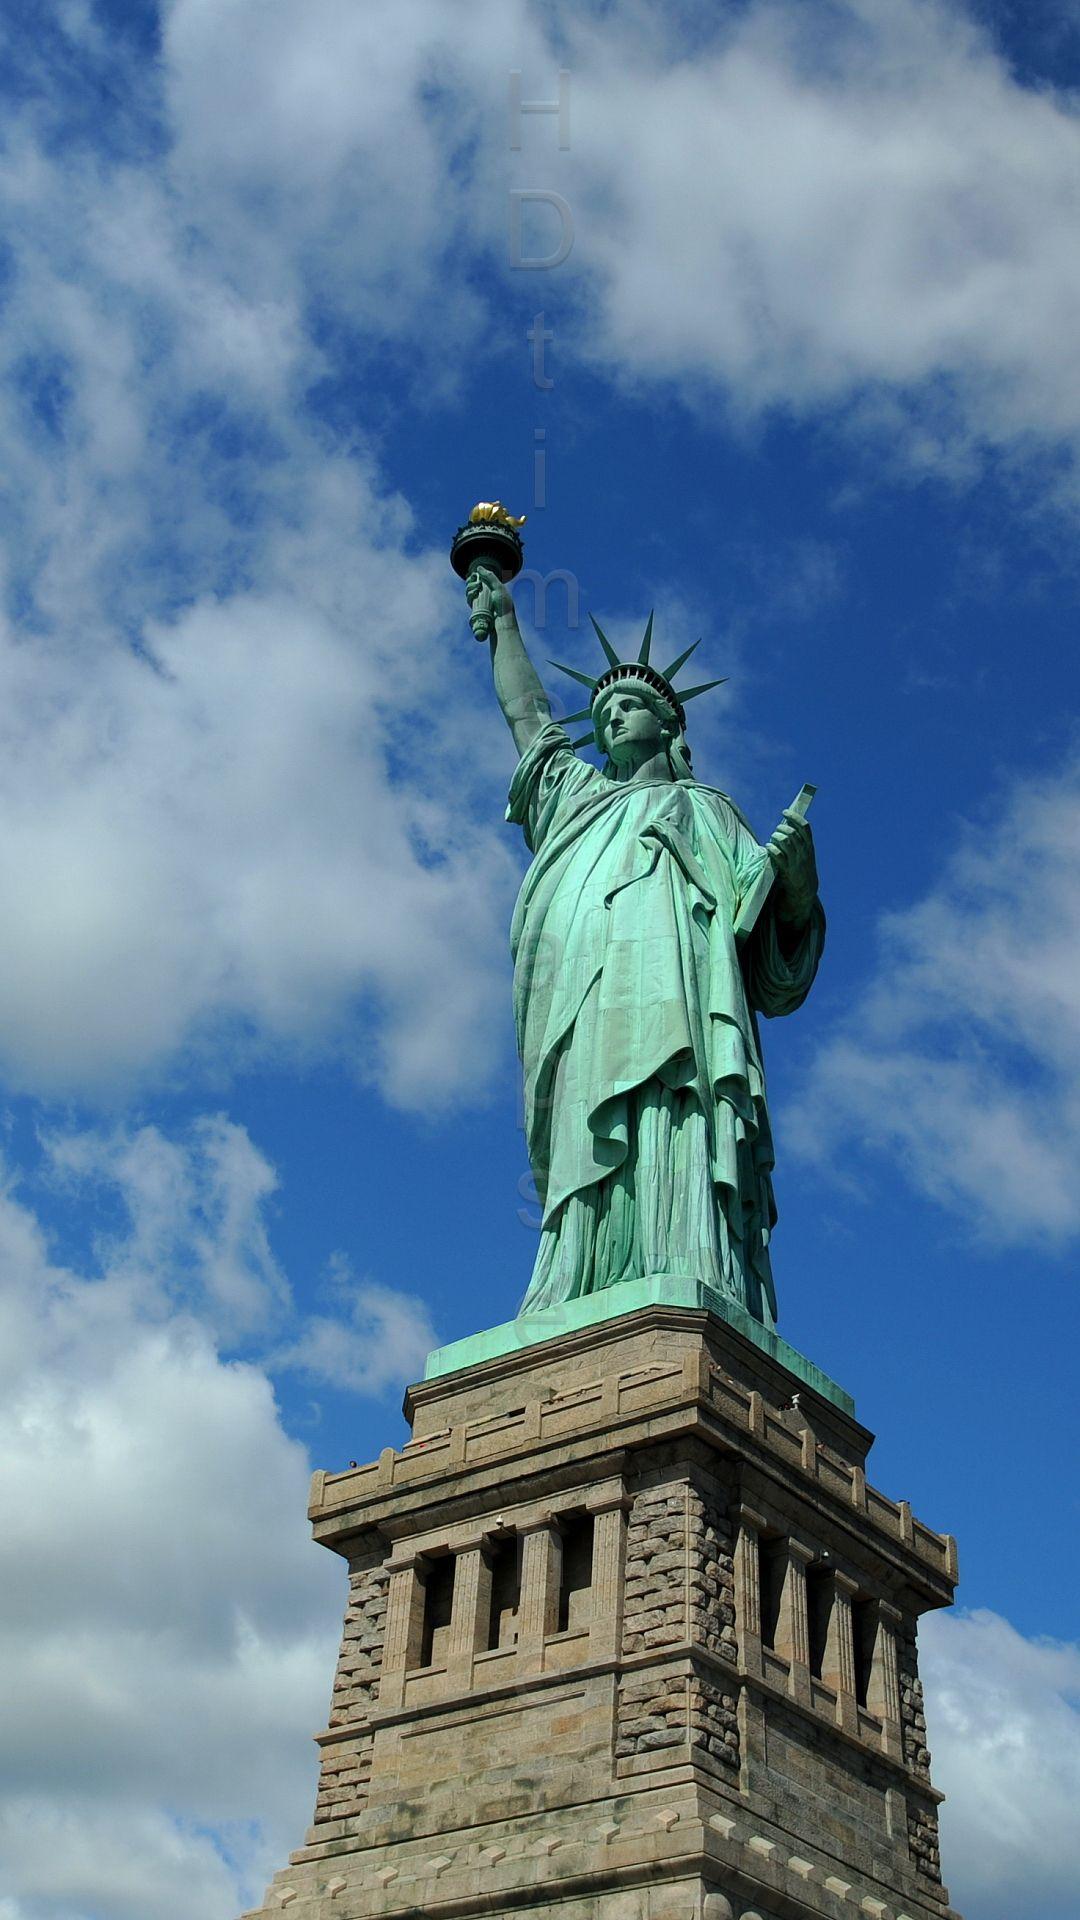 Ultra HD 4K Video Time Lapse Stock Footage of Liberty